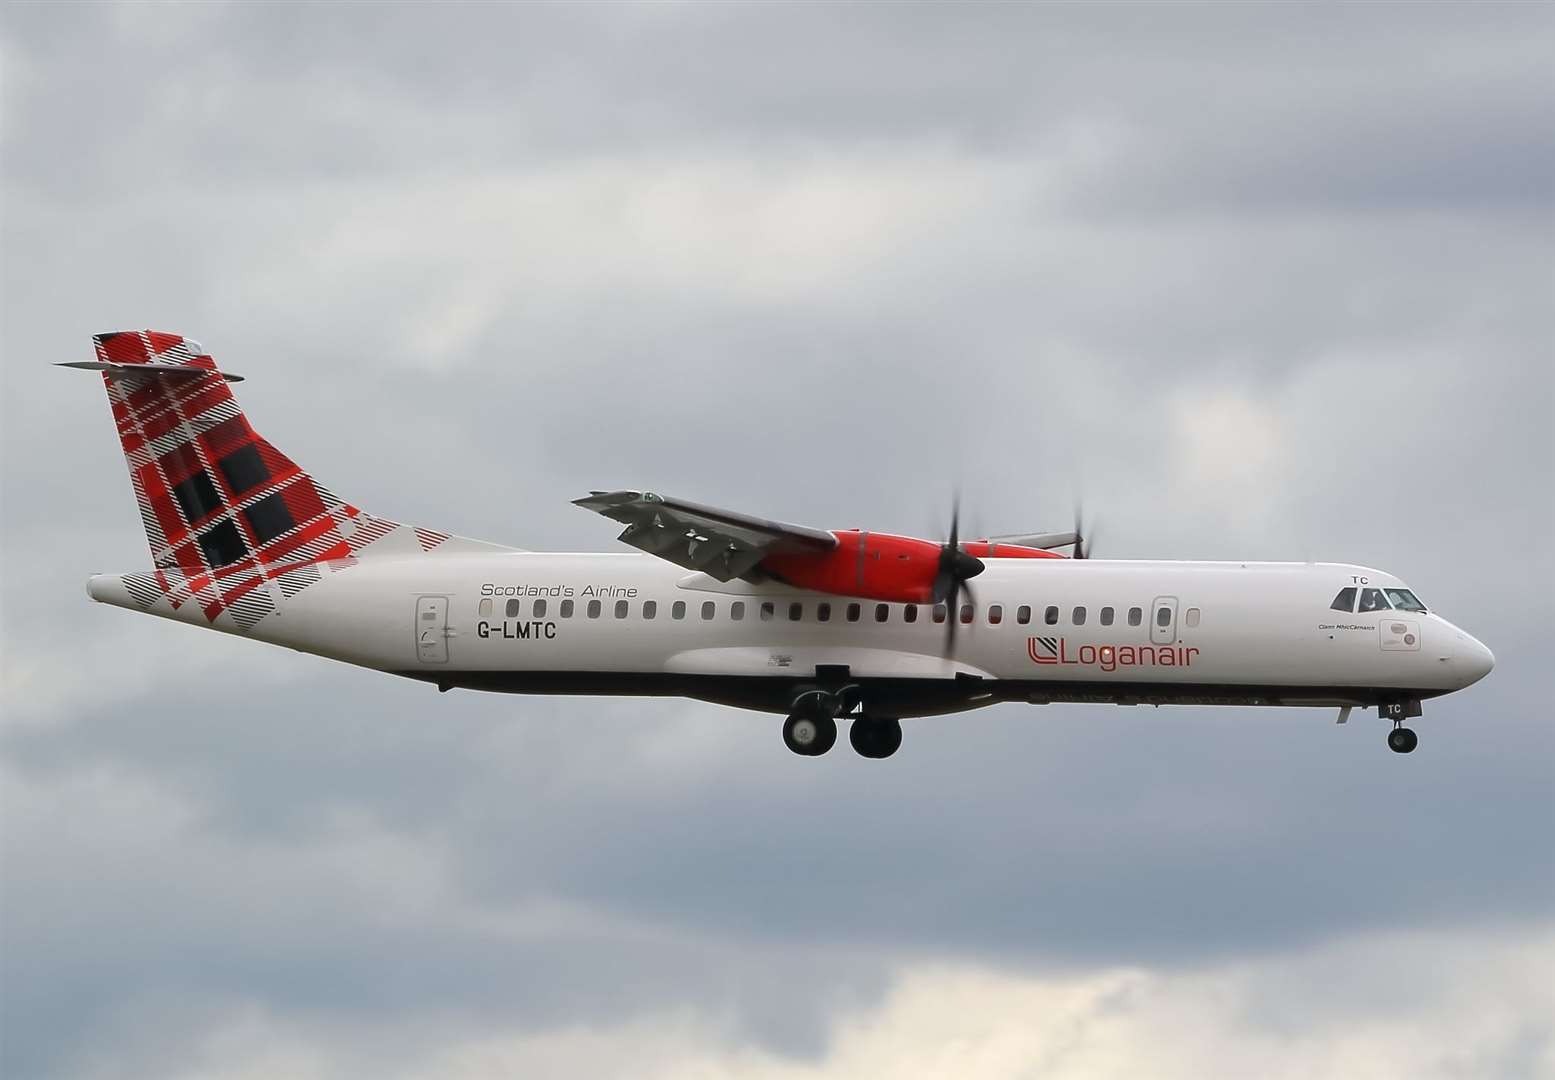 Passengers from the Highlands will be able to make easier connections to North America thanks to Loganair partnership.